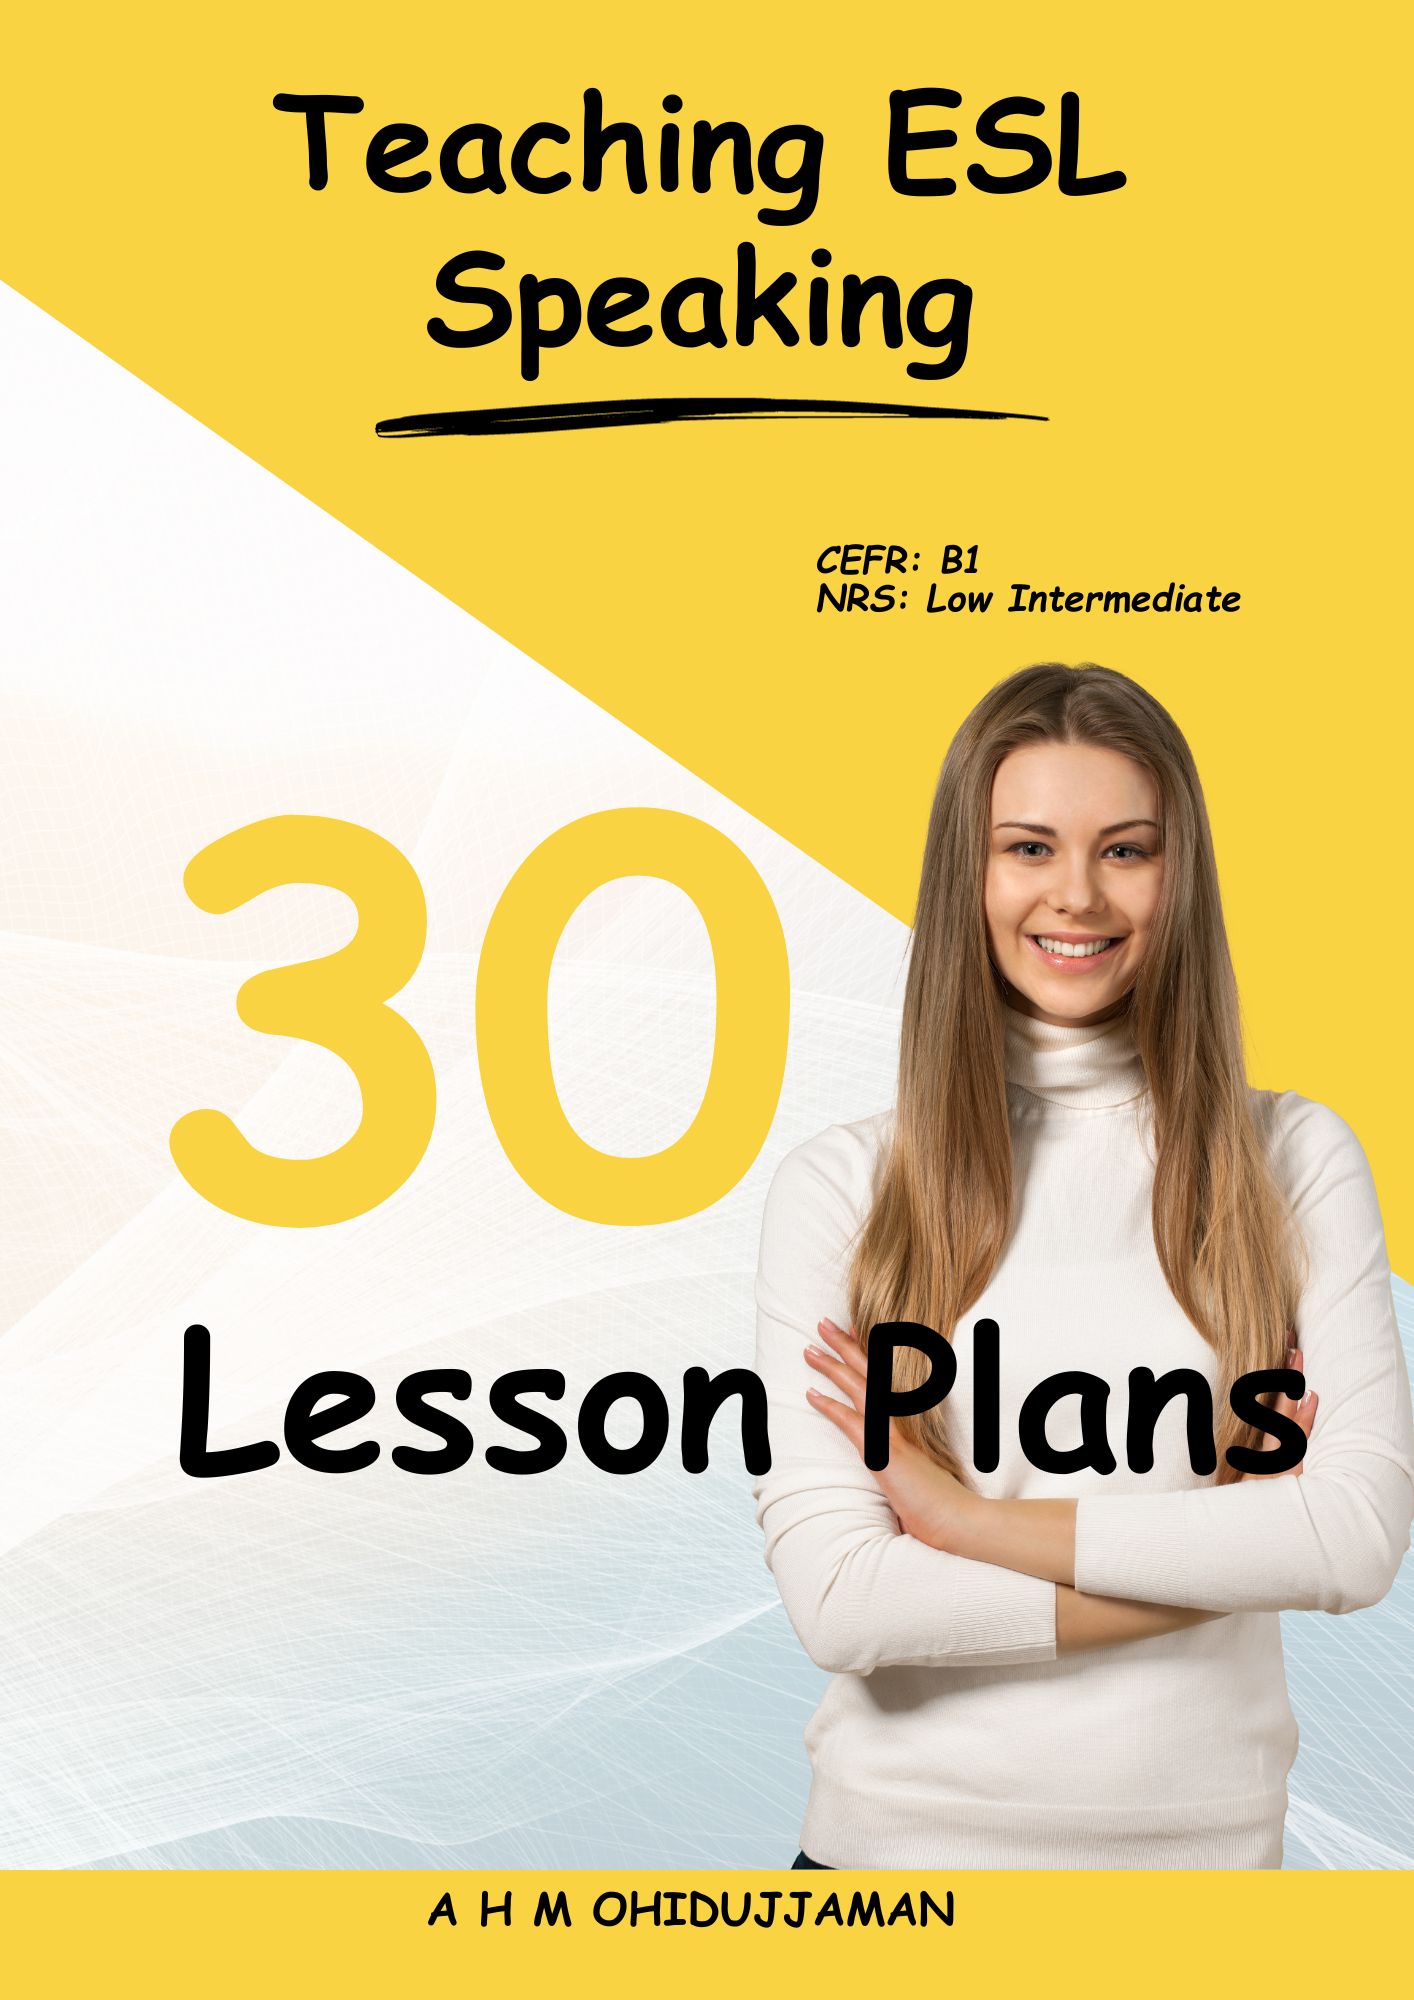 speaking assignments for esl students